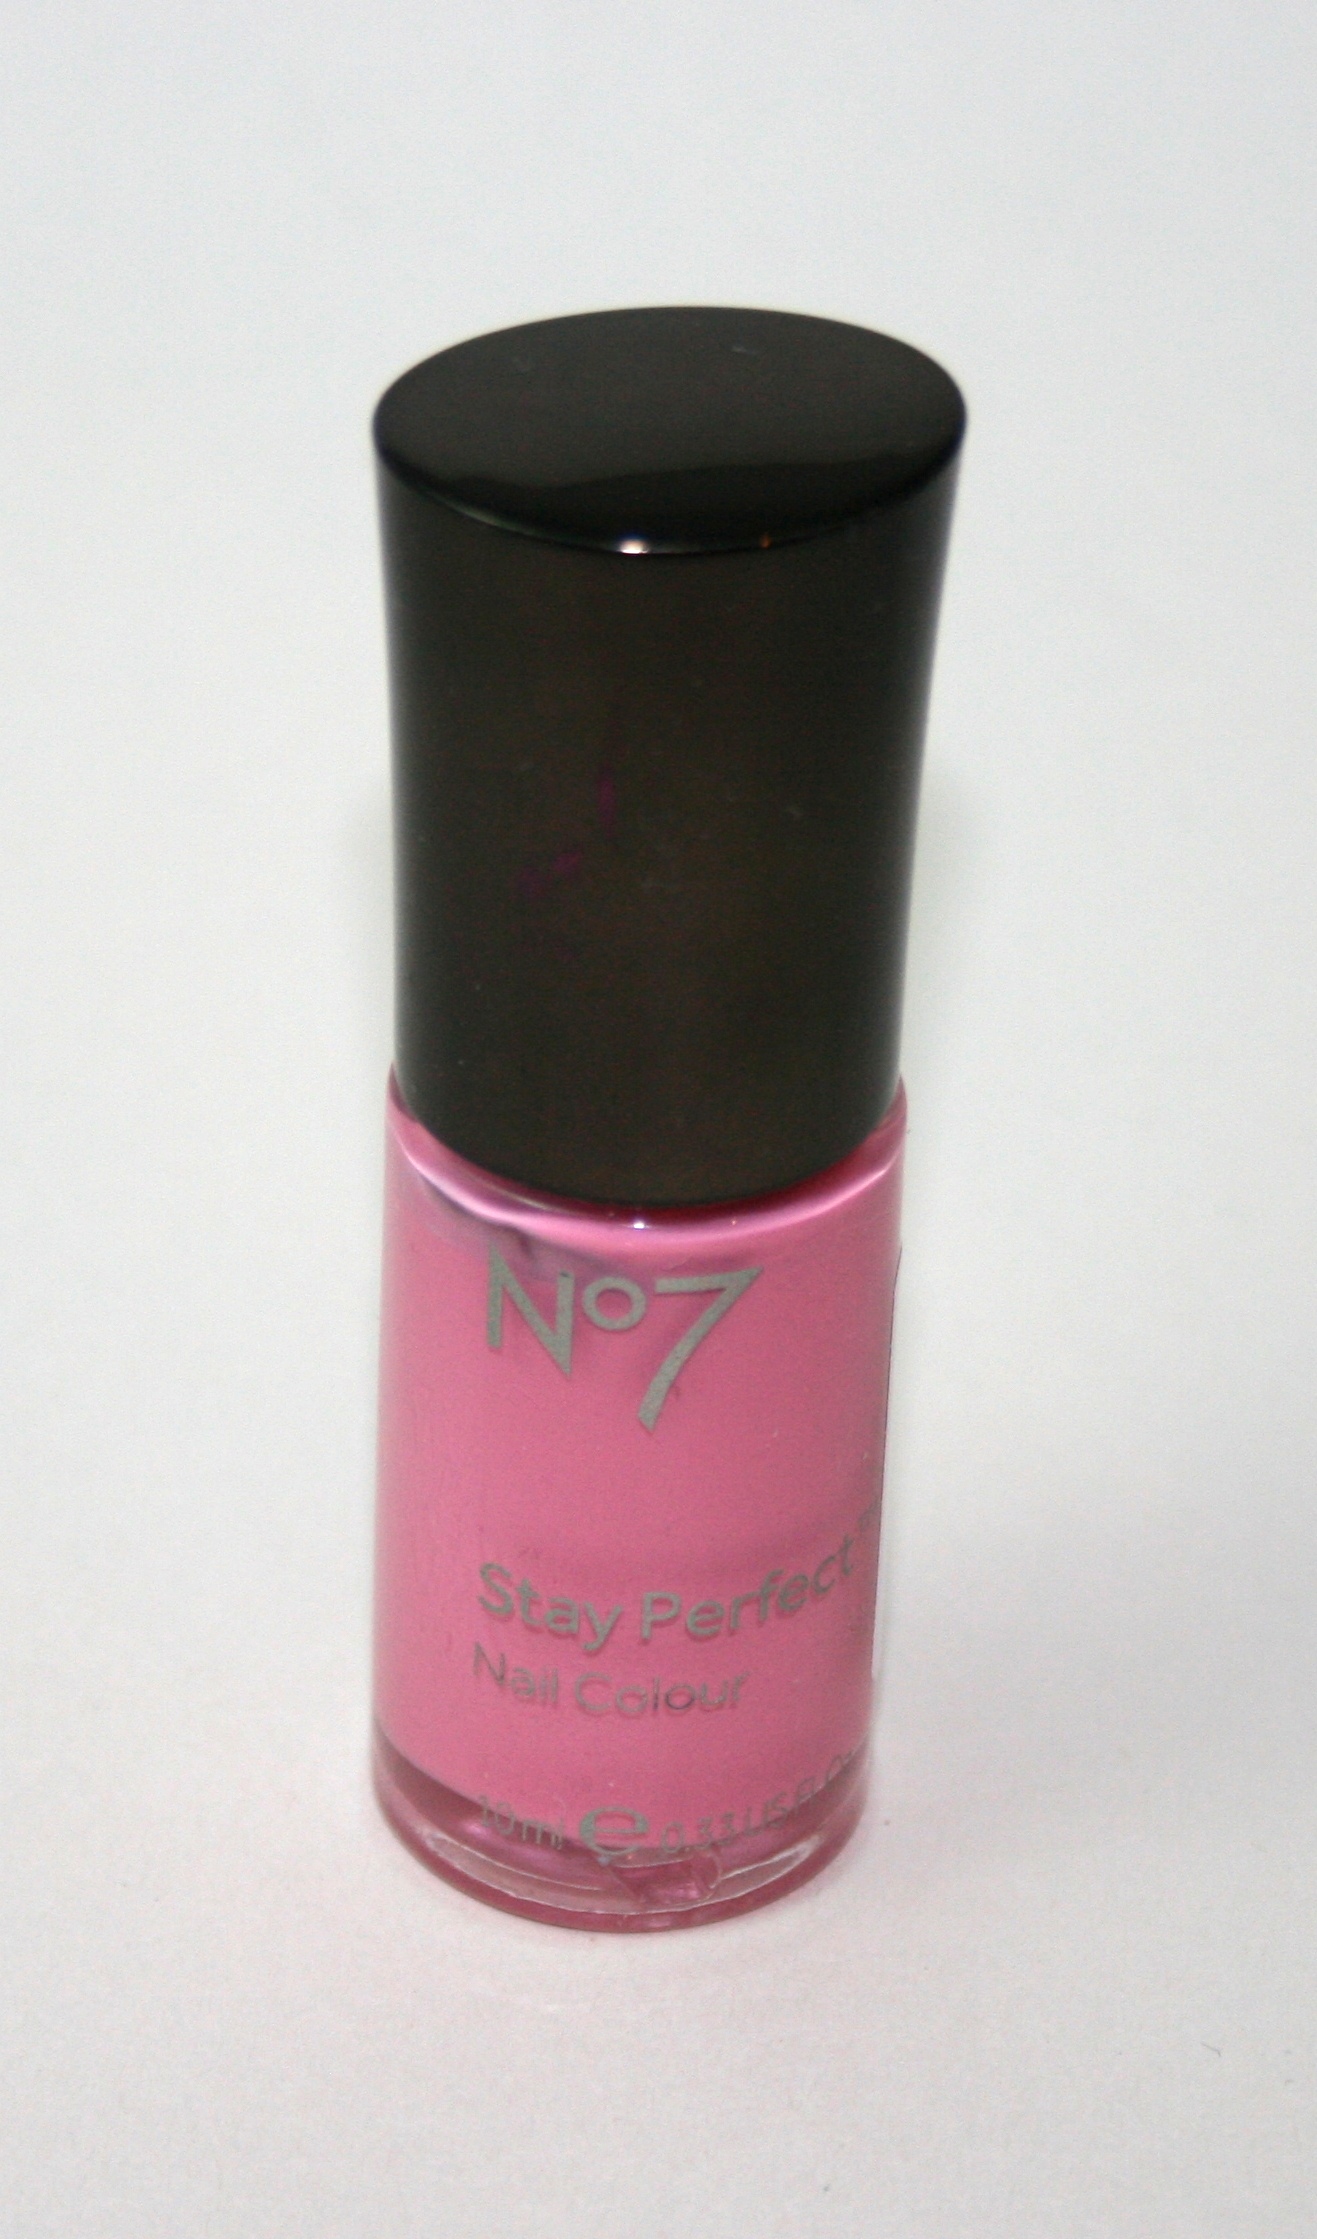 NOTD: Boots No7 Pink Blossom